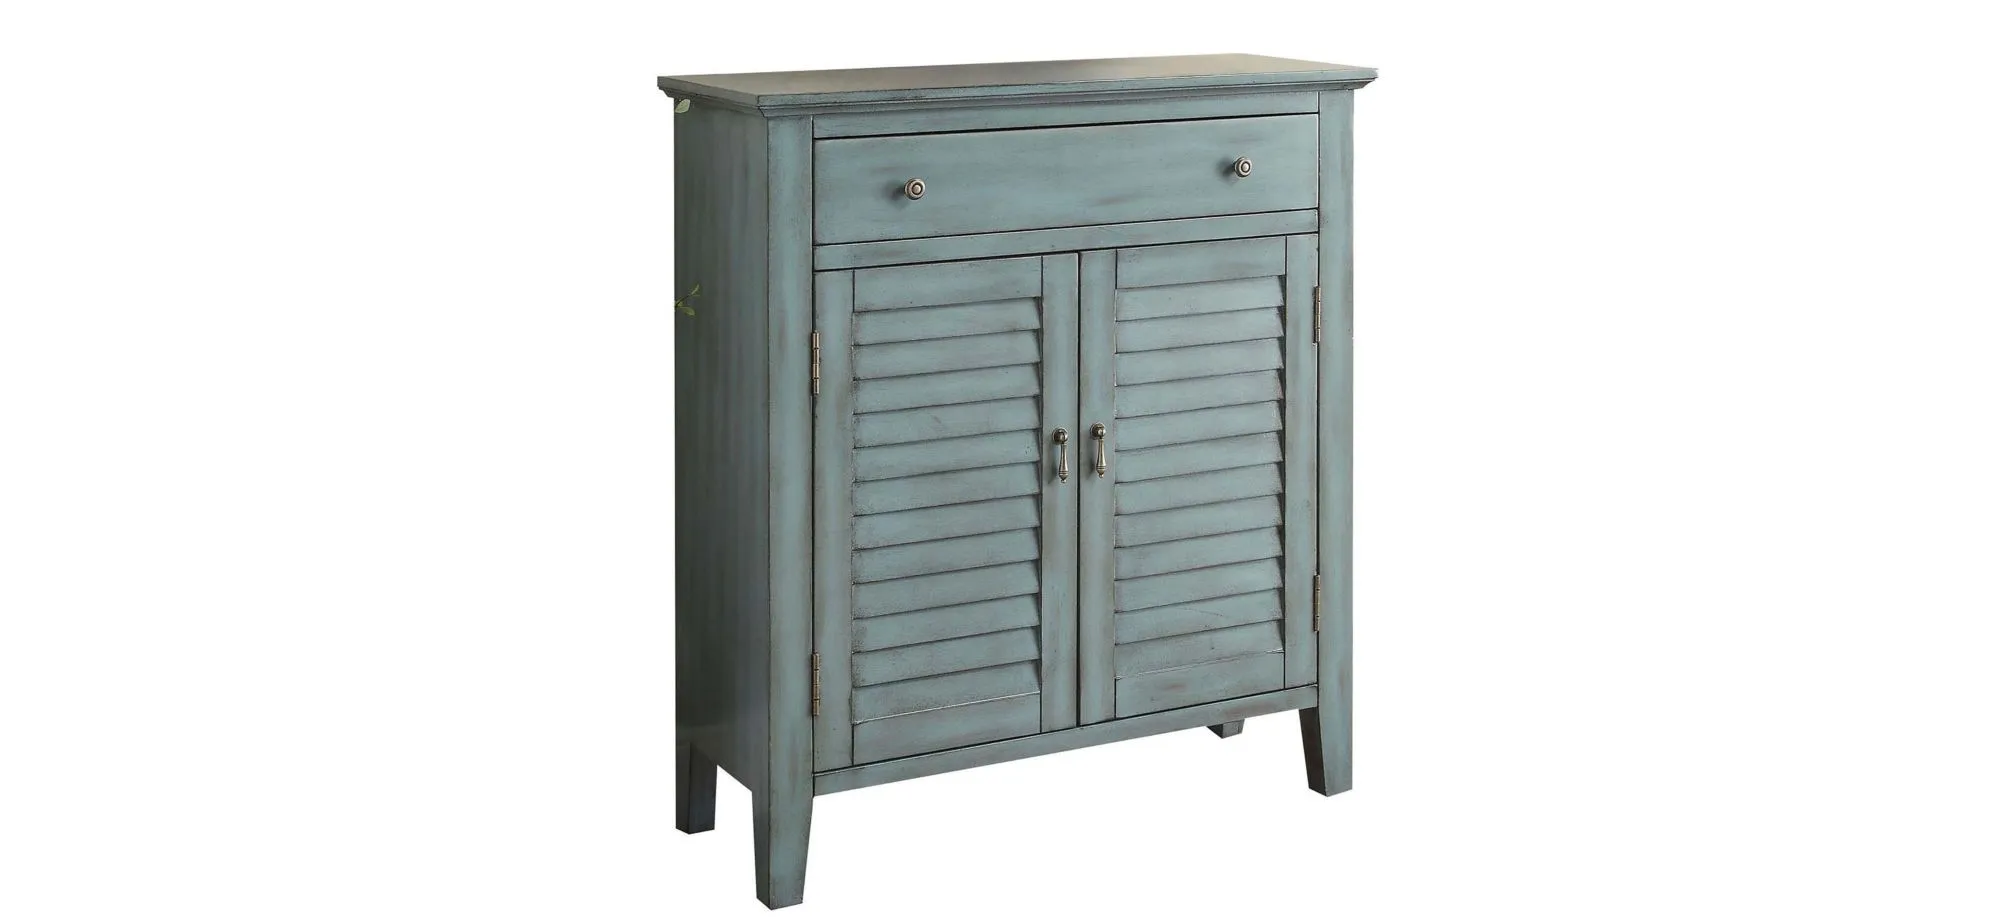 Winchell Console Cabinet in Antique Blue by Acme Furniture Industry